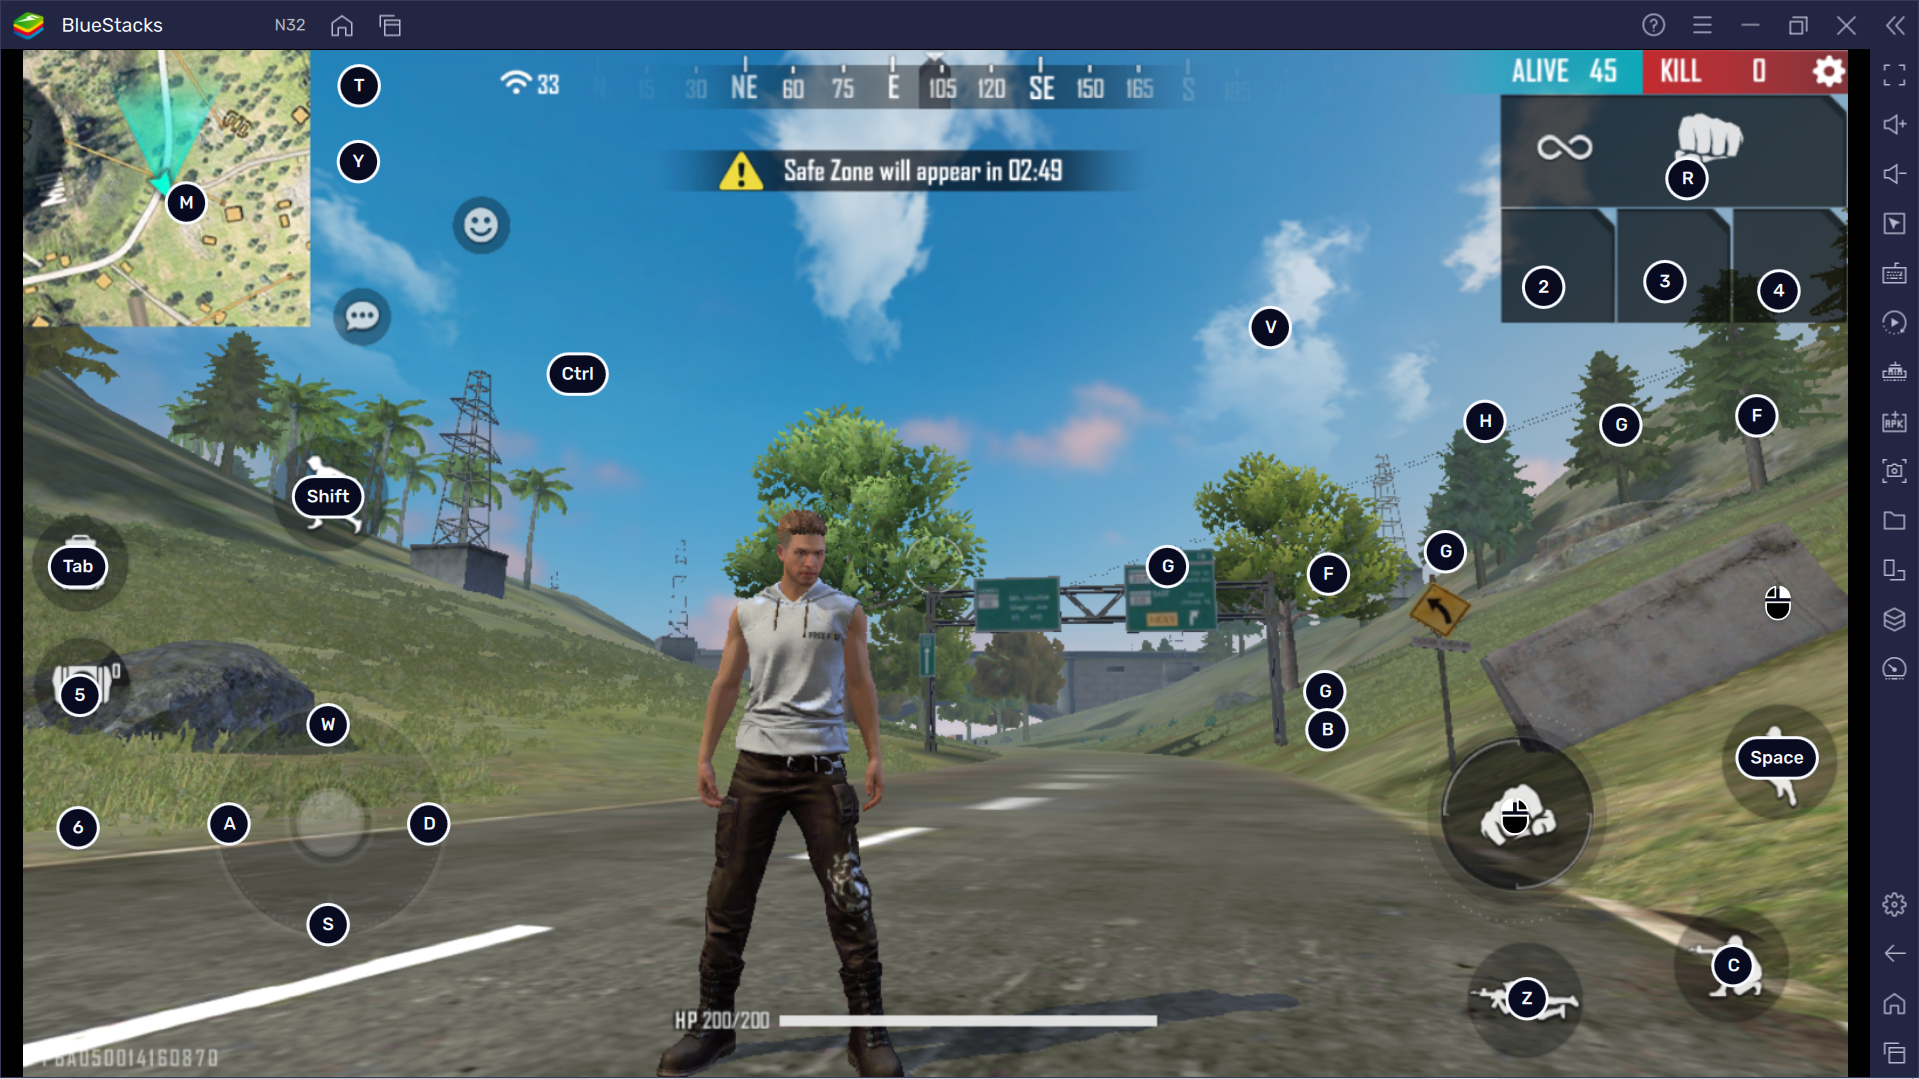 How To Play Free Fire On PC/Laptop, Bluestacks 5.12